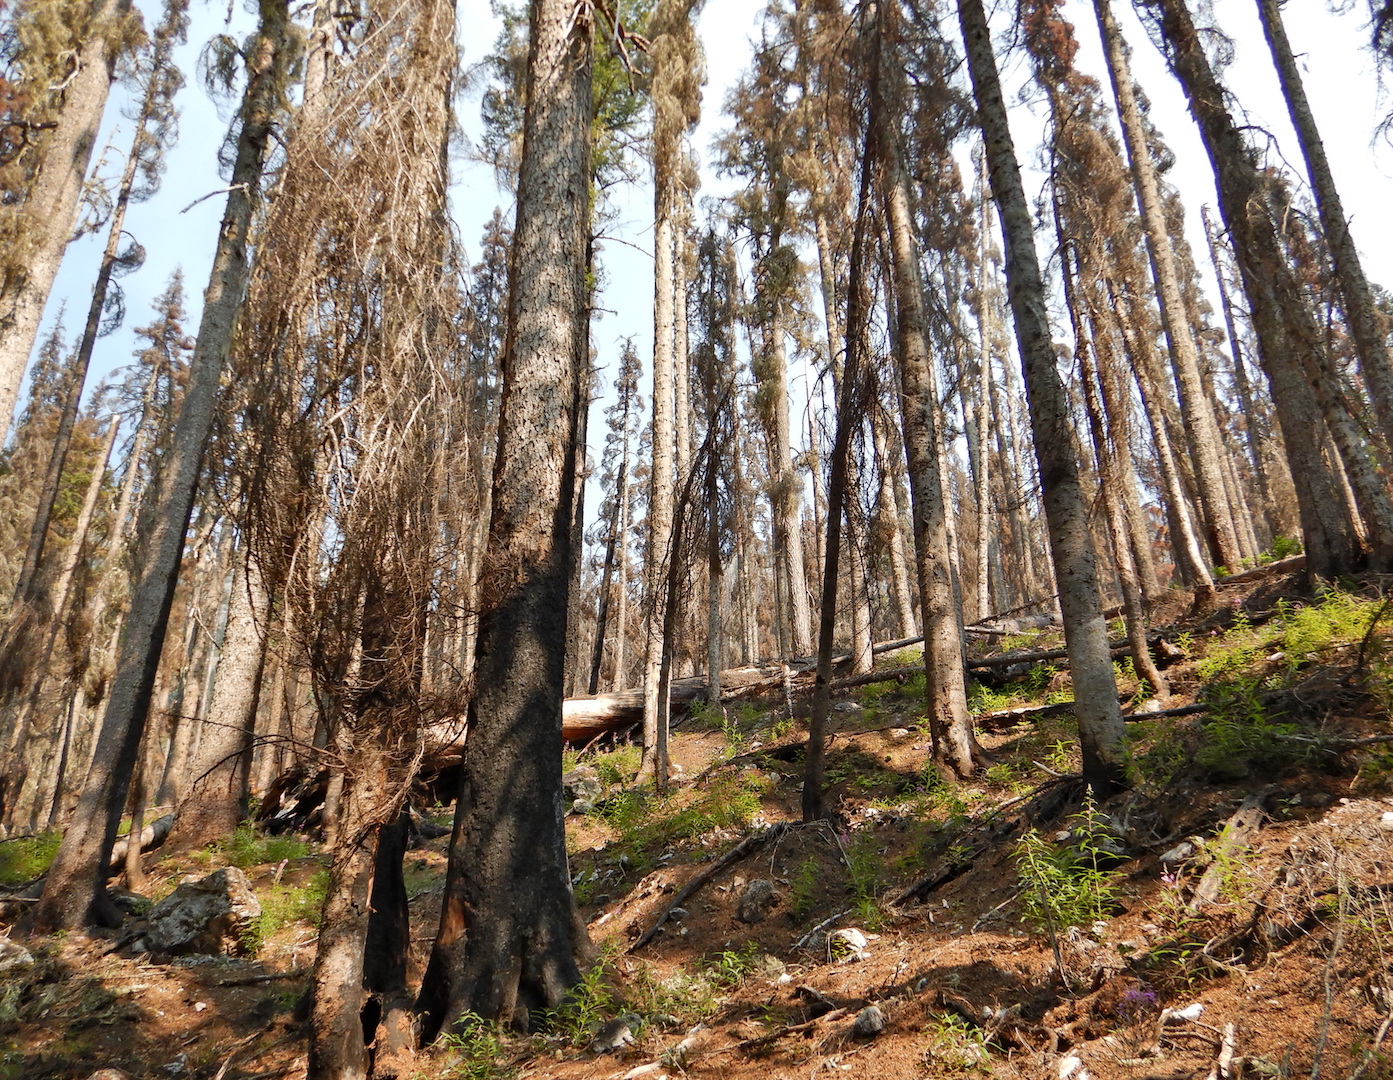 lightly burned forest with standing dead trees and some minor green vegetation on ground